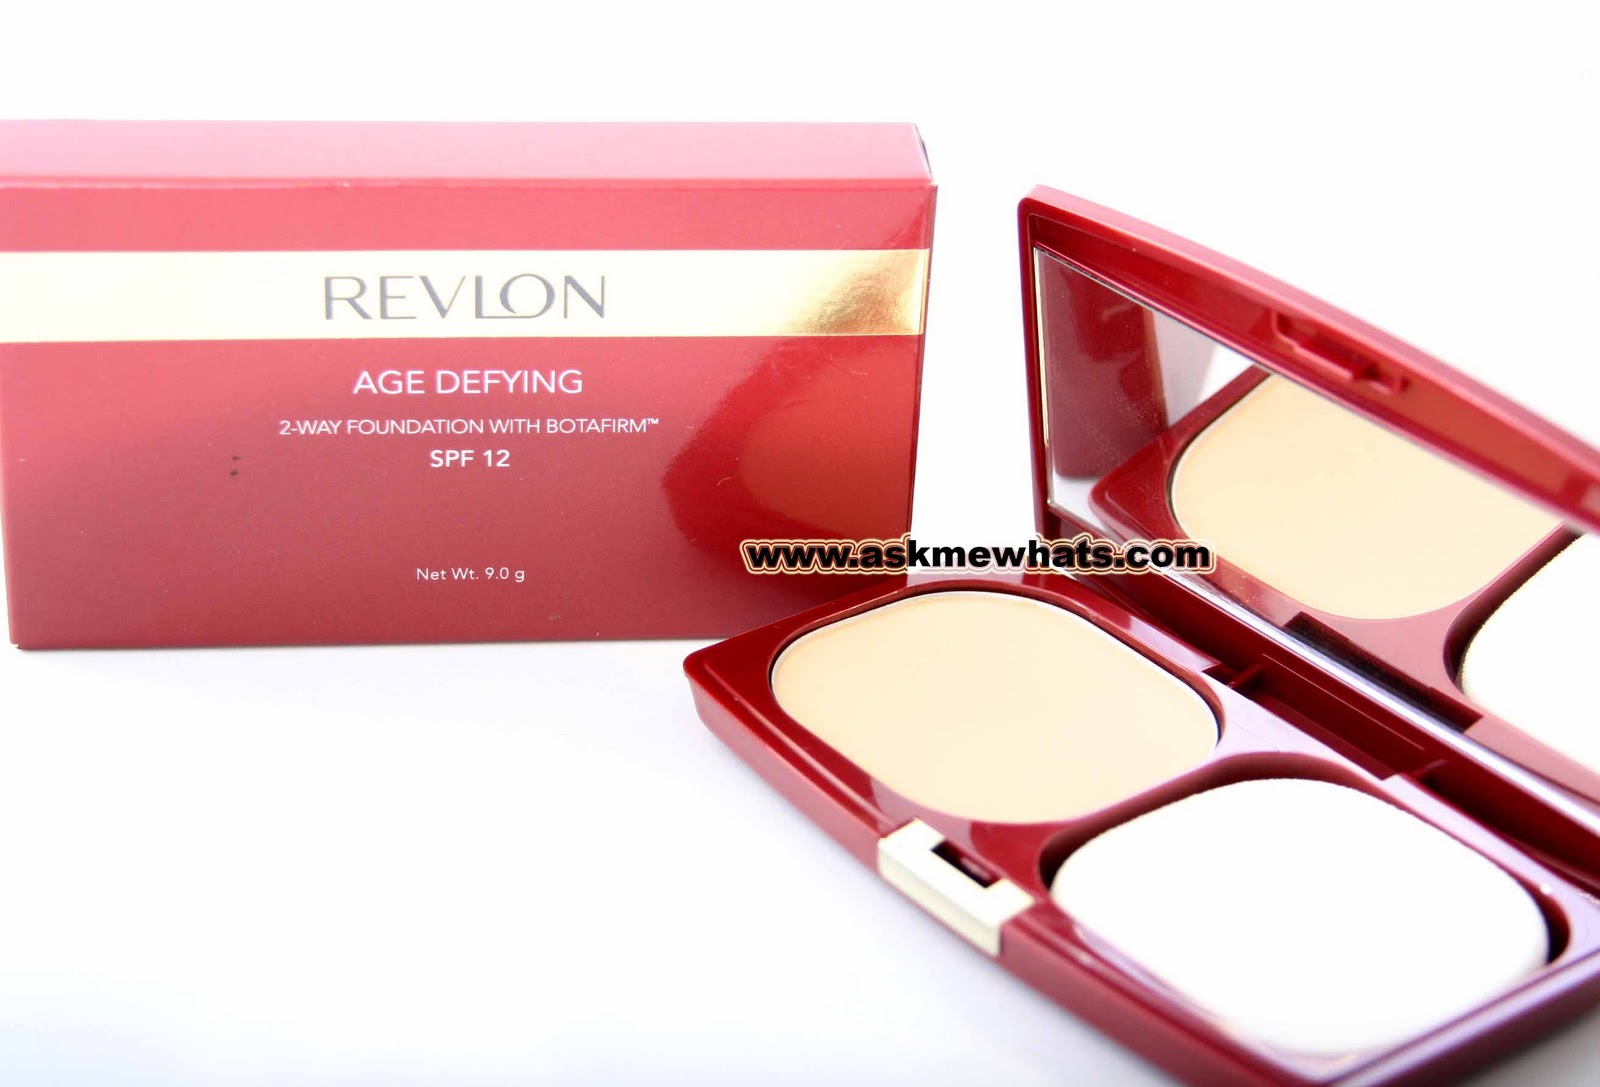 Revlon Age Defying 2-Way Foundation with Botafirm Review